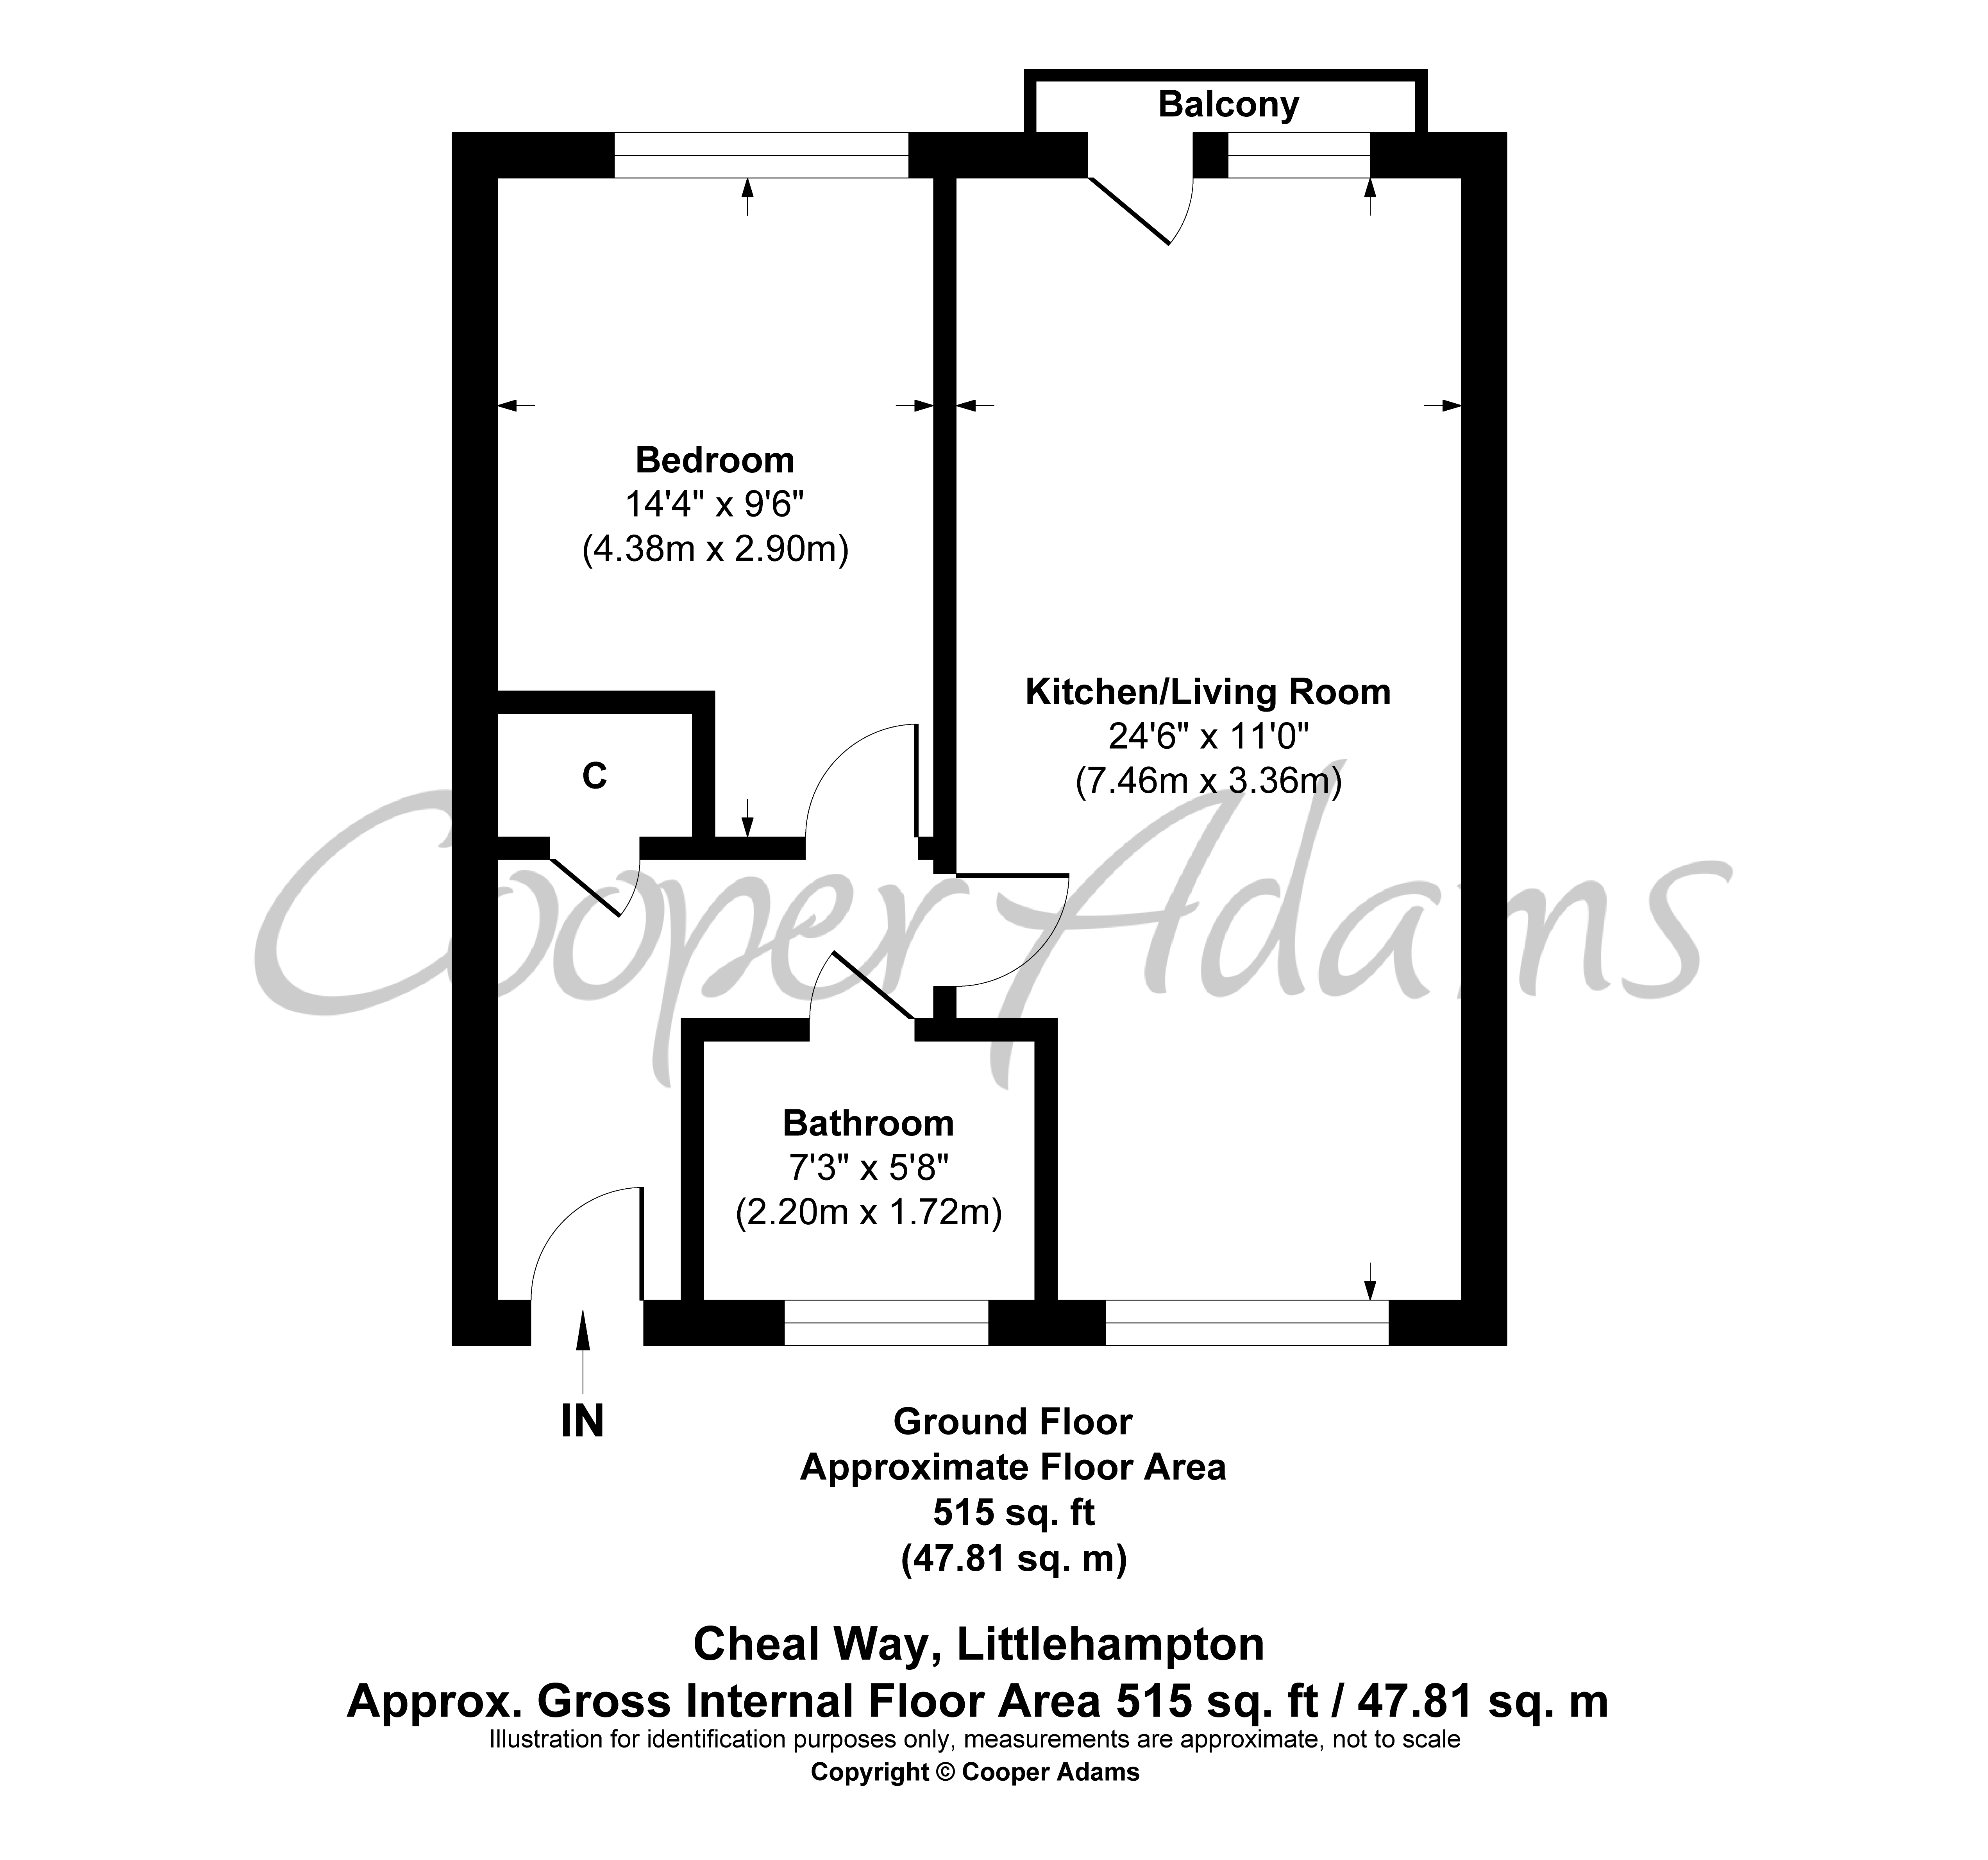 1 bed apartment for sale in Cheal Way, Littlehampton - Property floorplan